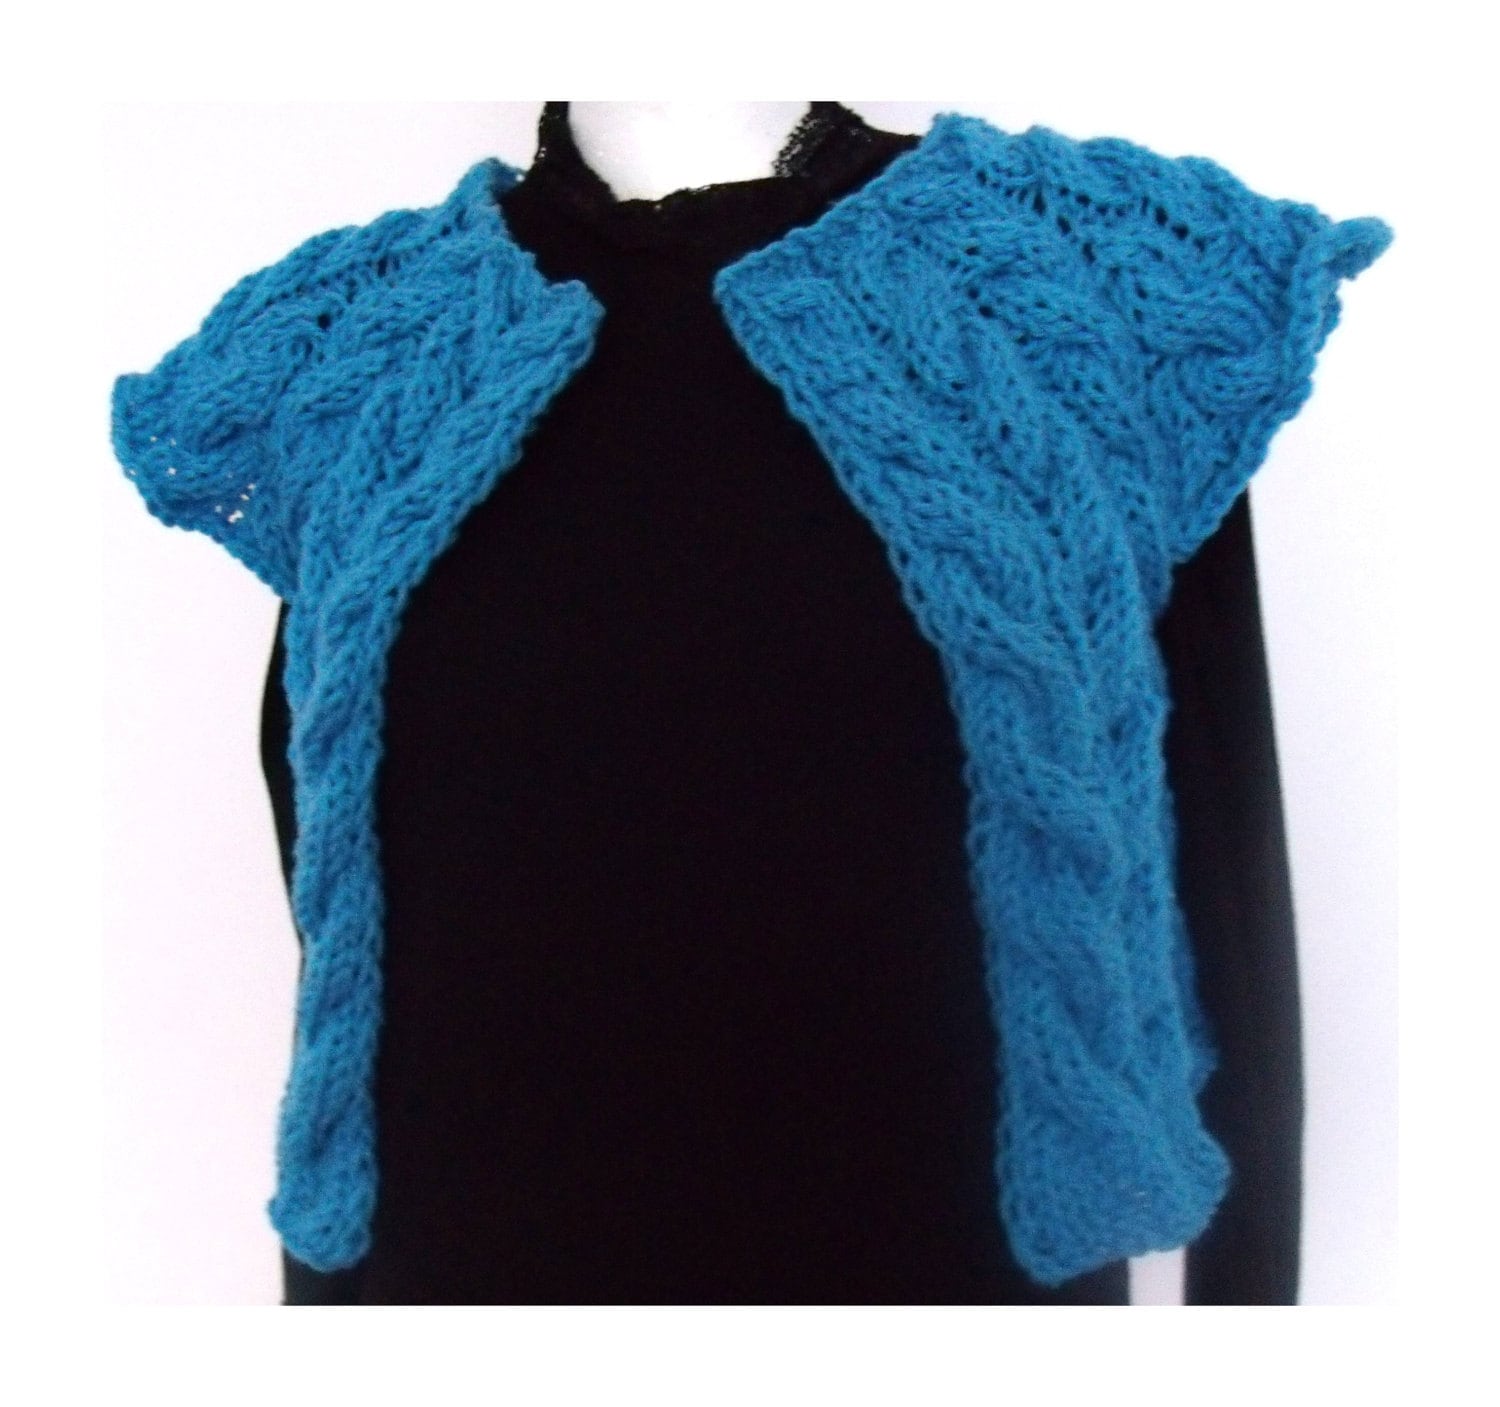 Blue cabled vest shrug bolero wool bulky OOAK hand knitted 4 seasons - MyLaceSpace